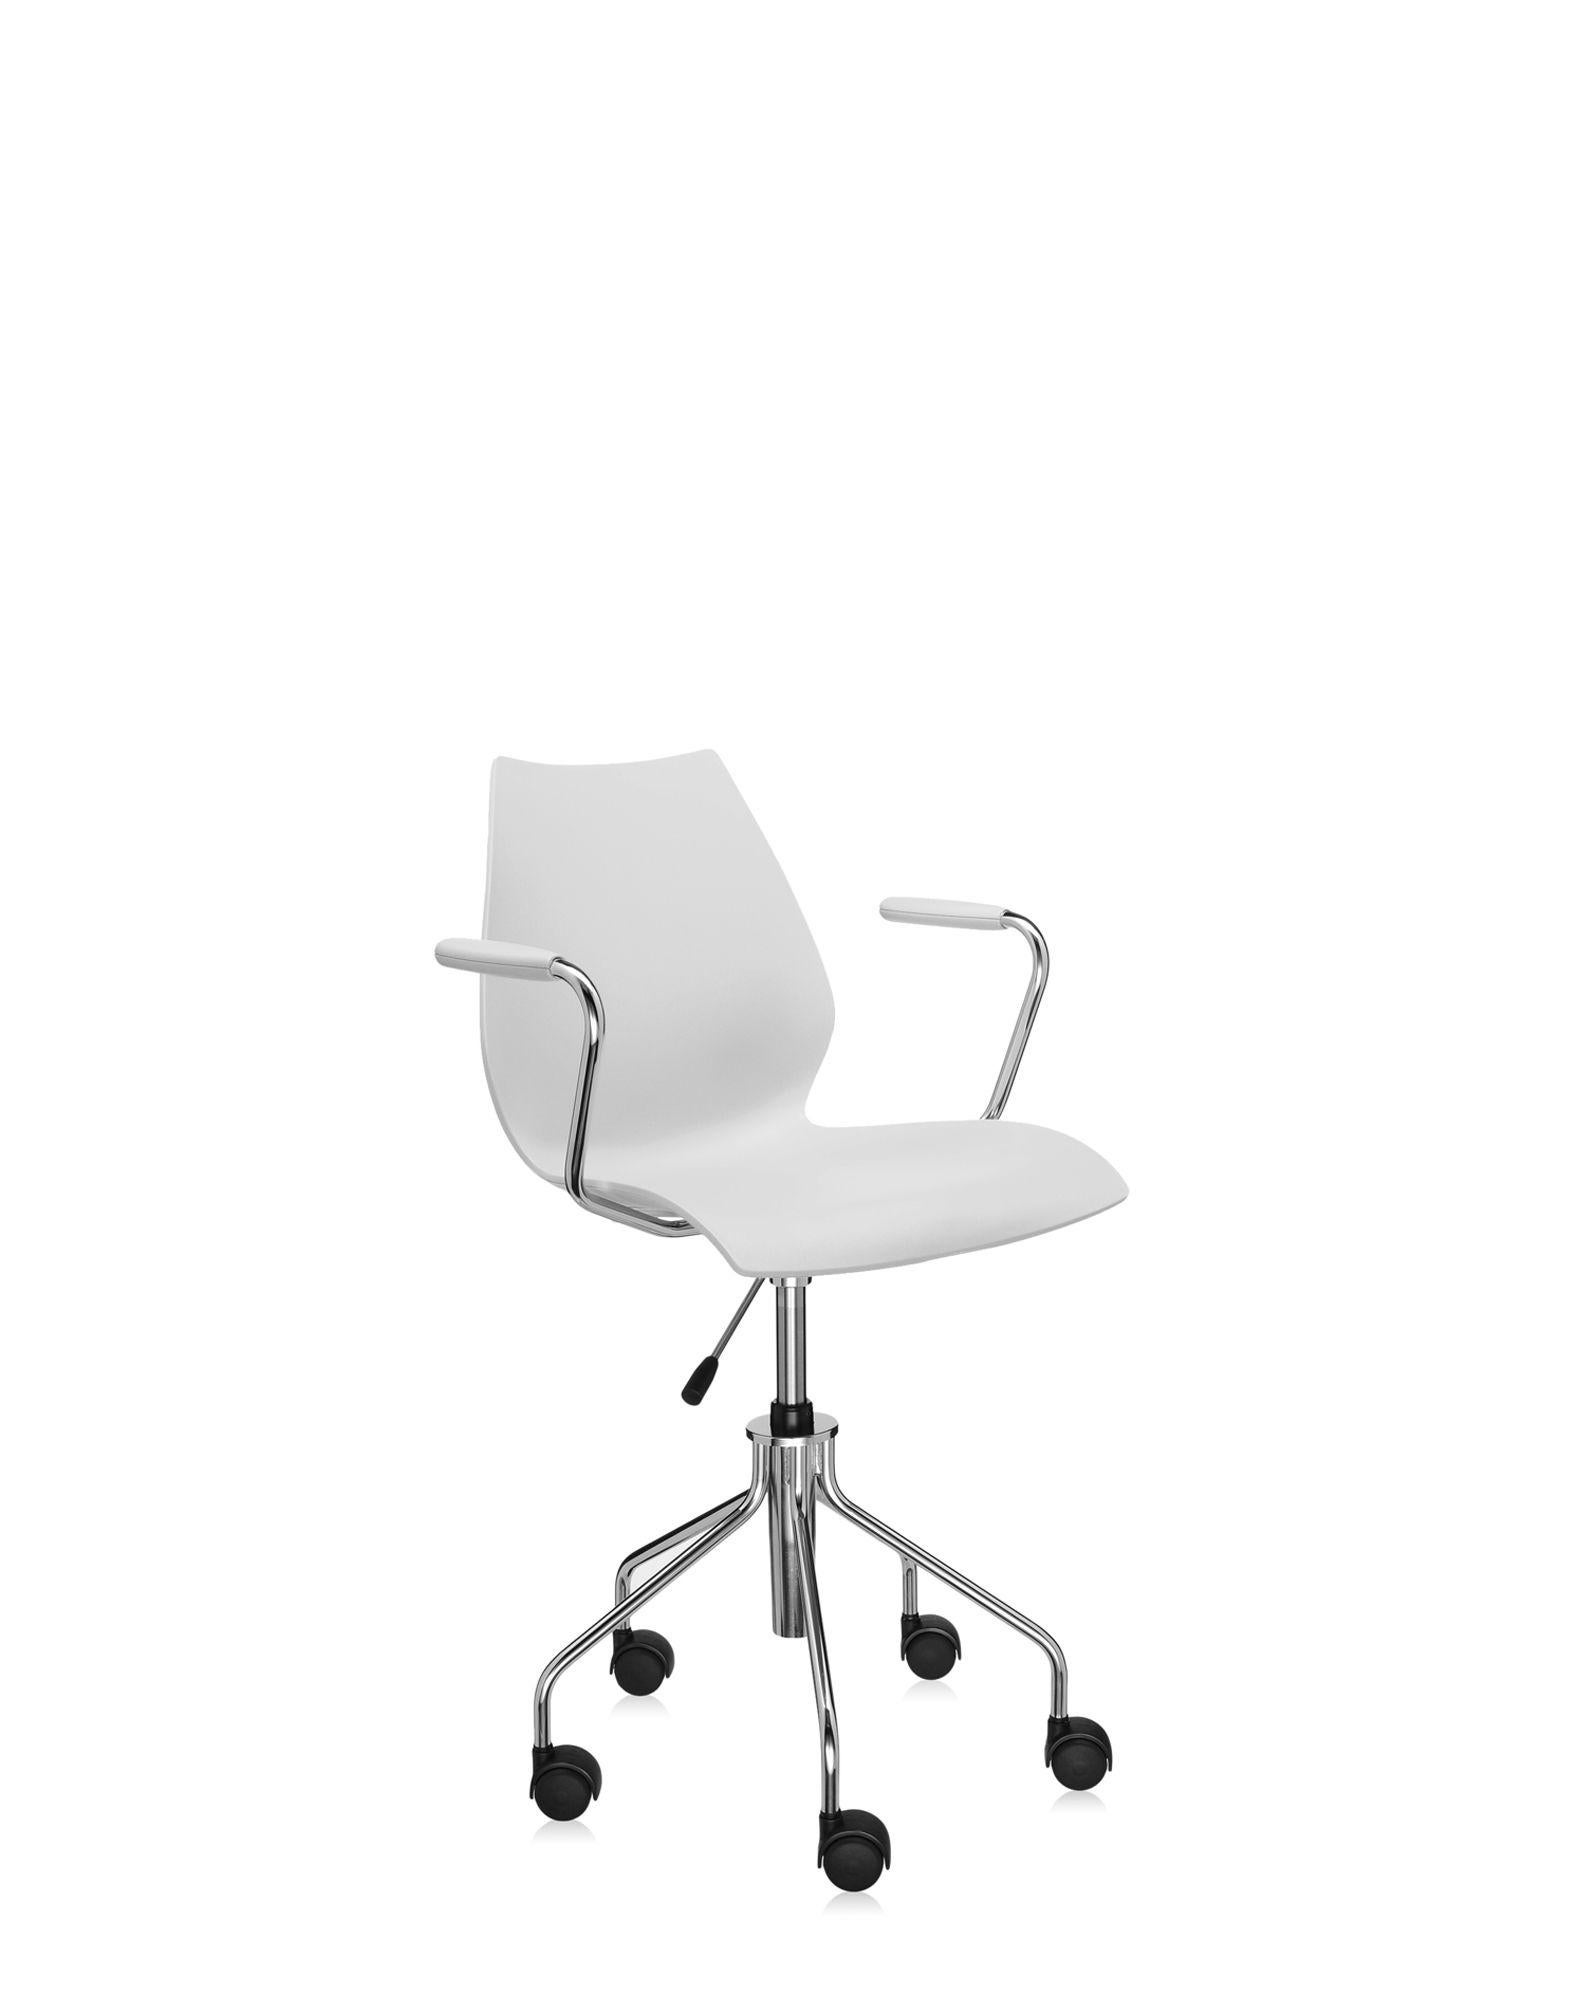 Plastic Kartell Maui Swivel Chair Adjustable in Pale Grey by Vico Magistretti